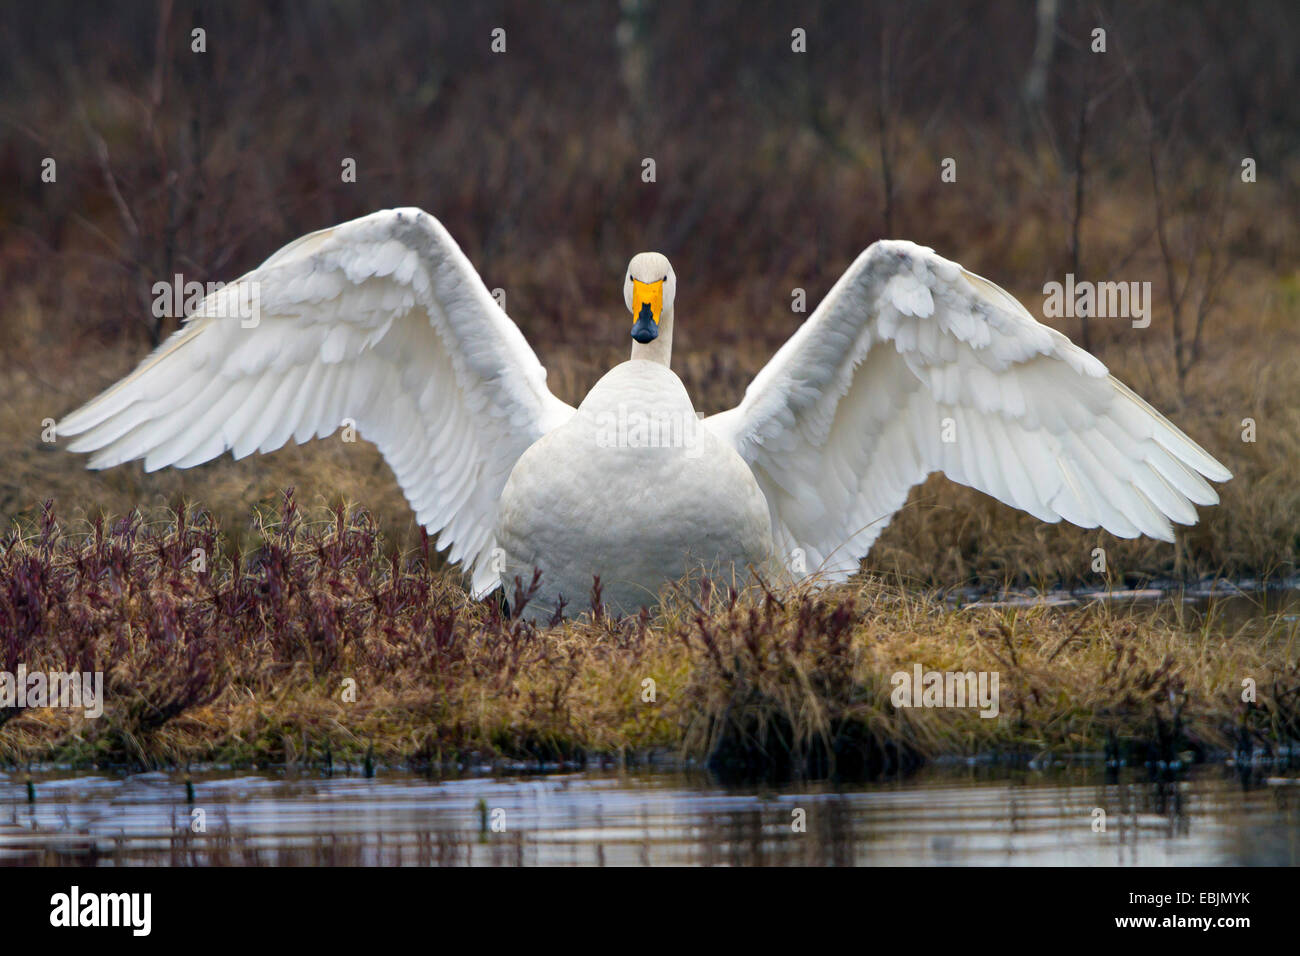 whooper swan (Cygnus cygnus), at a lake with wings outstretched, Sweden, Hamra National Park Stock Photo